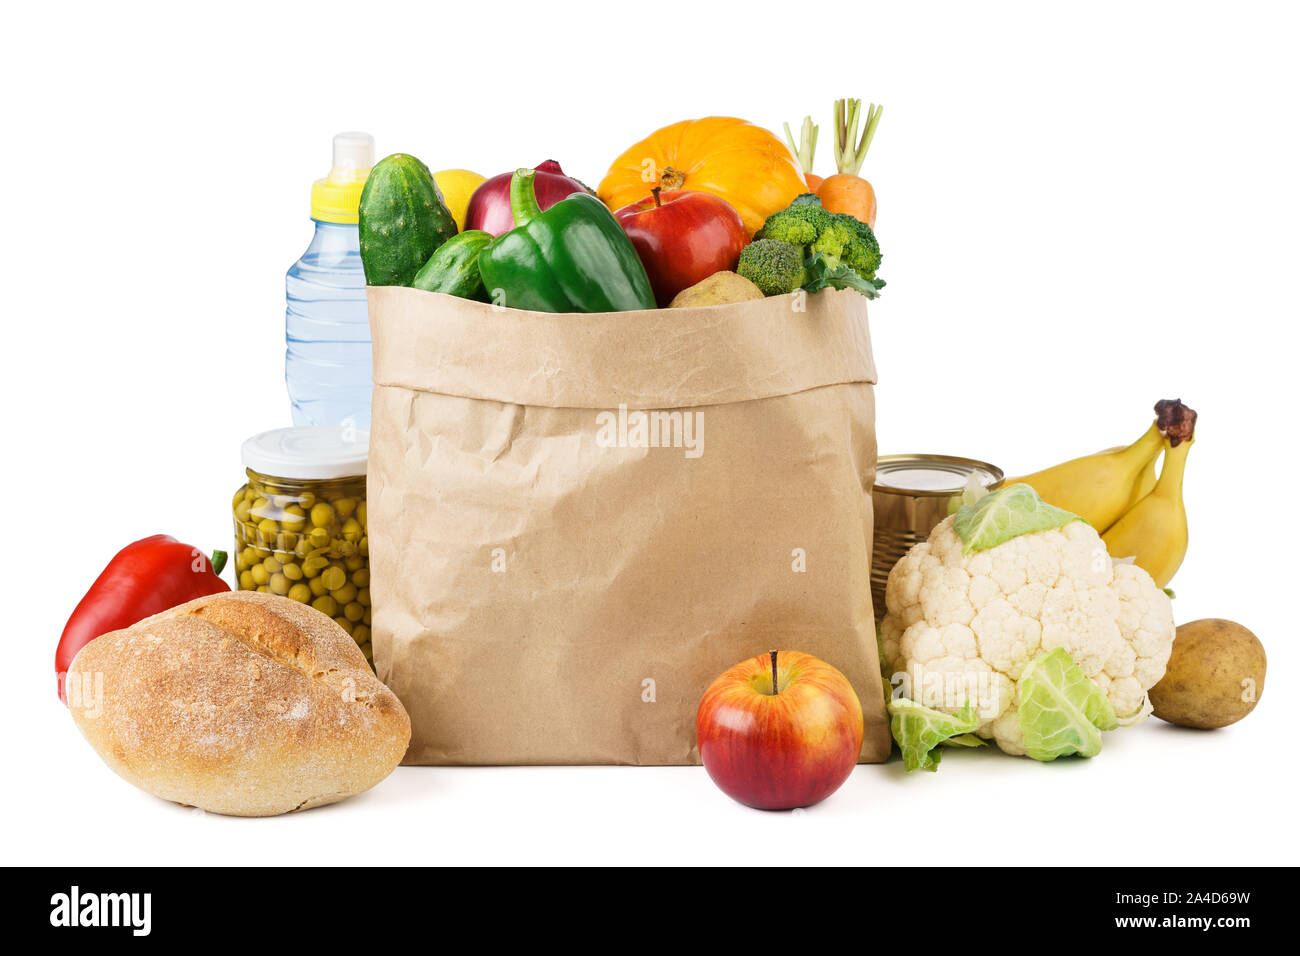 Paper bag full of various groceries - fresh fruits and vegetables, bread. Food delivery concept. Stock Photo